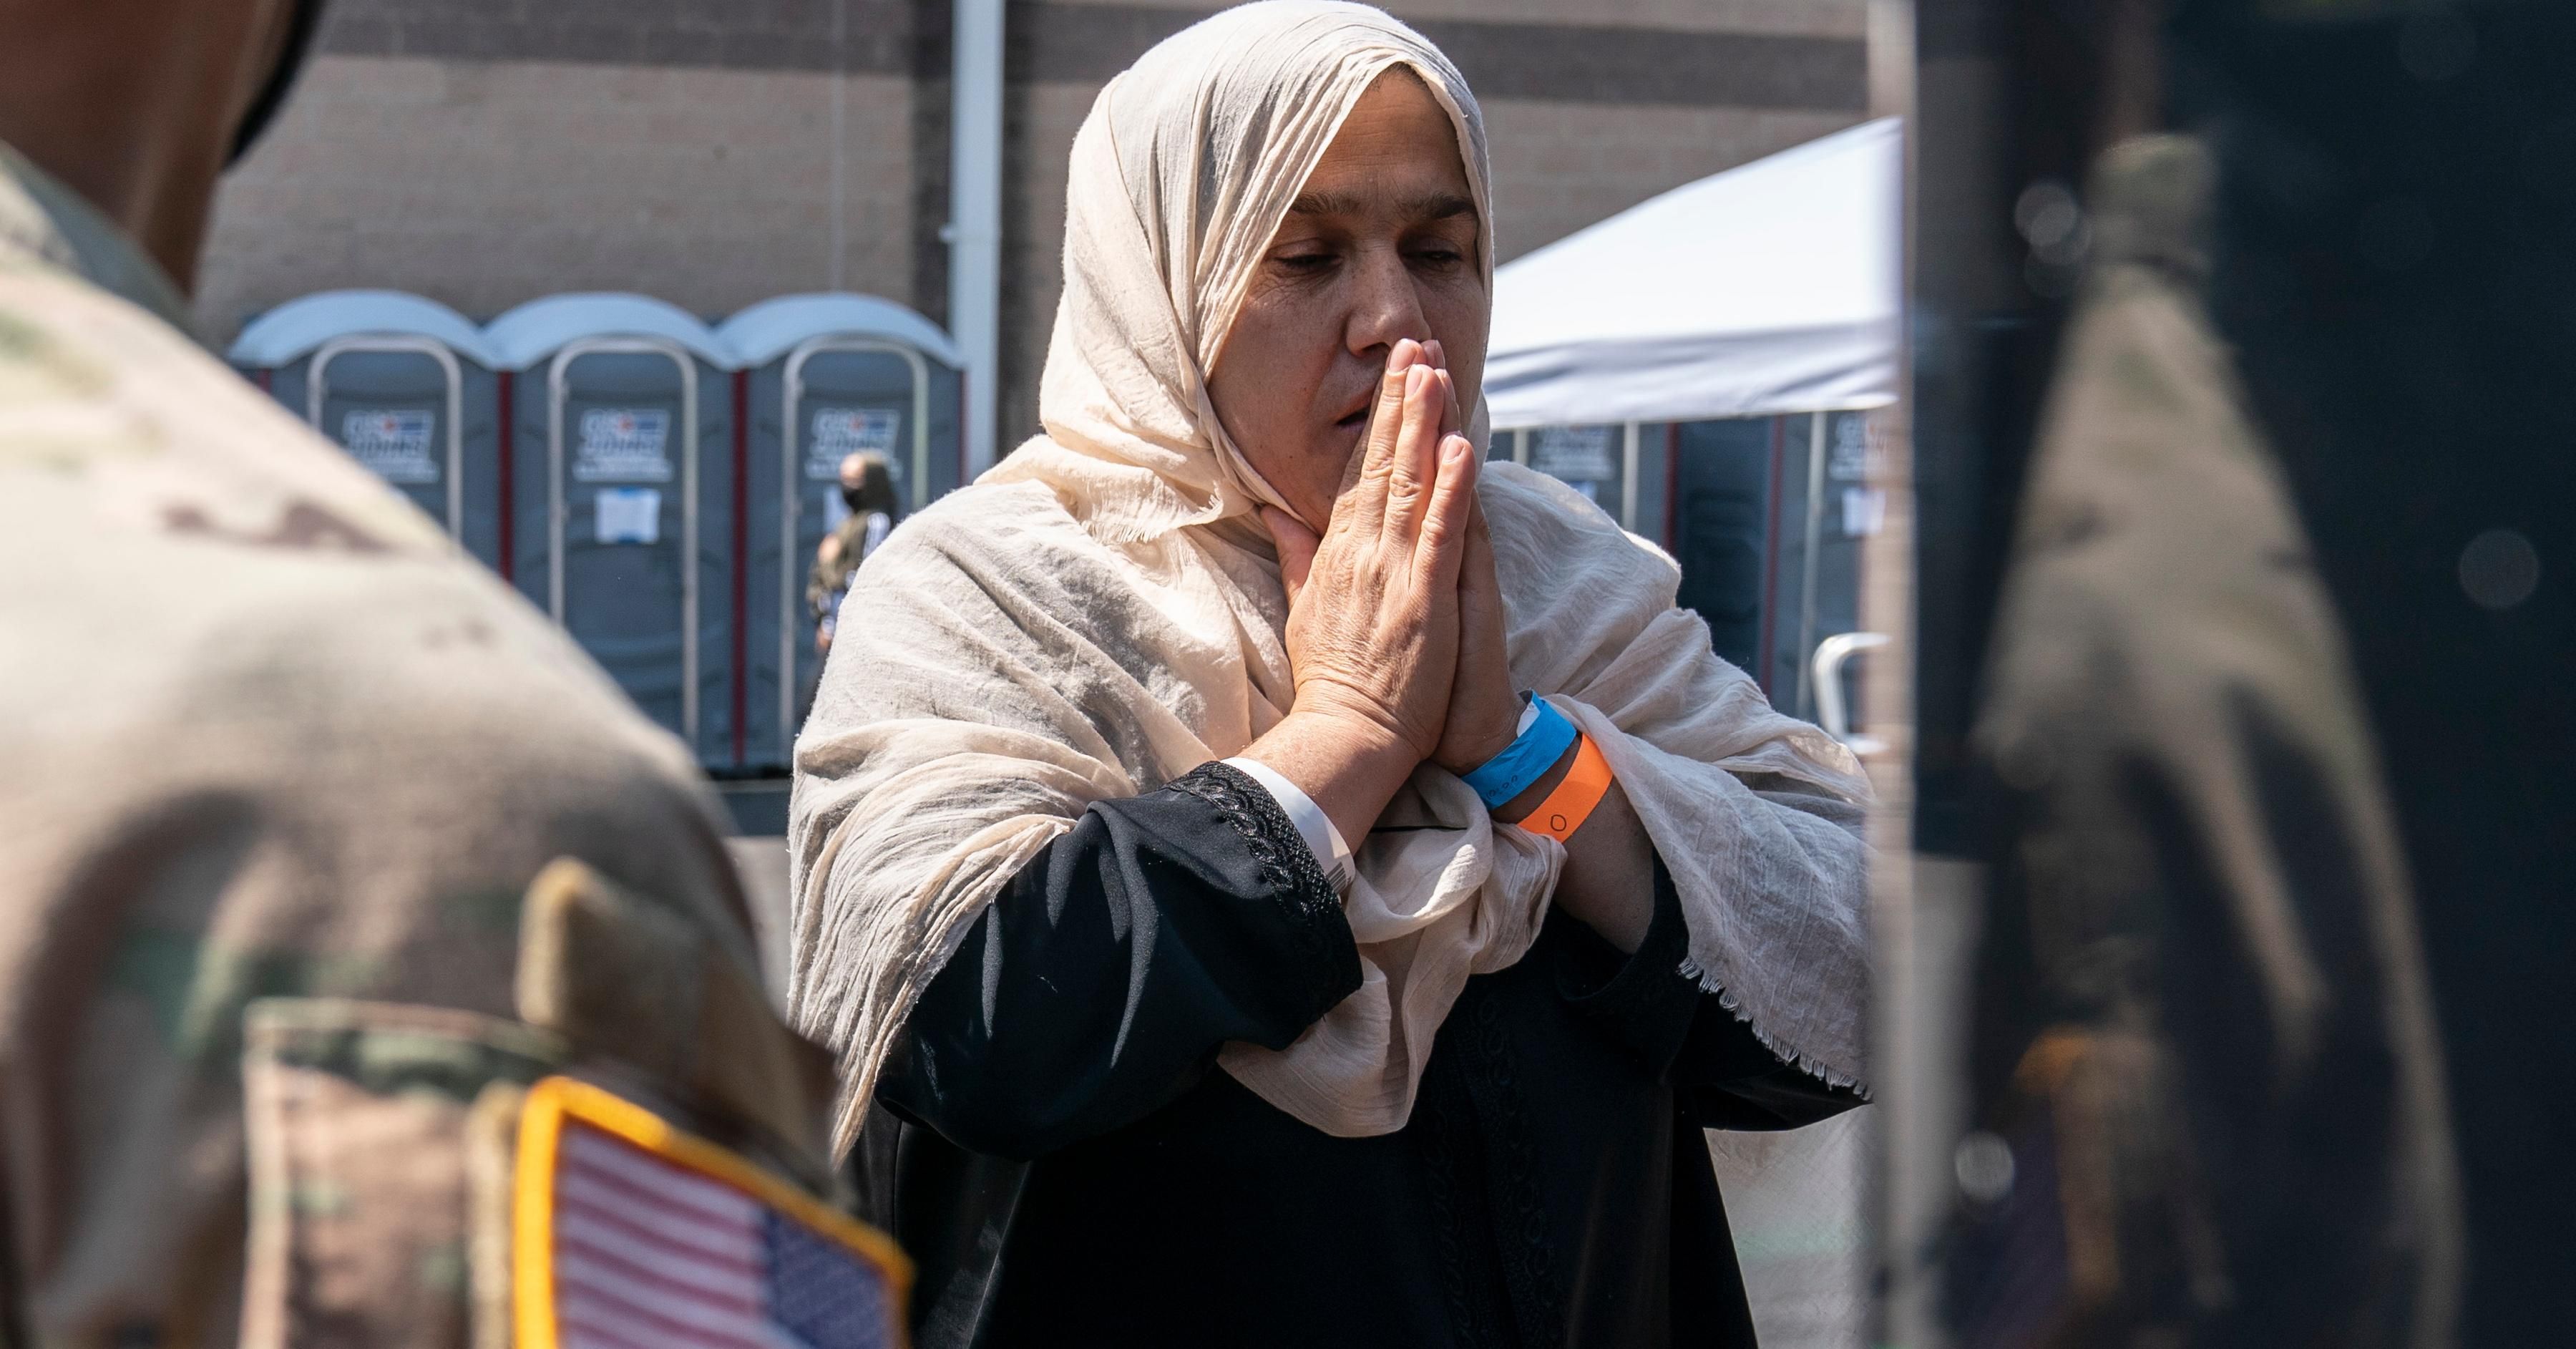 A woman prays as she boards a bus at a processing center for refugees evacuated from Afghanistan at the Dulles Expo Center on August 24, 2021 in Chantilly, Virginia.on August 24, 2021 in Chantilly, Virginia. According to the U.S. State Department, between Sunday morning and Monday morning, 10,400 people were evacuated from Kabul on military flights and approximately 5,900 more people were evacuated on 61 coalition aircraft.(Photo by Joshua Roberts/Getty Images)